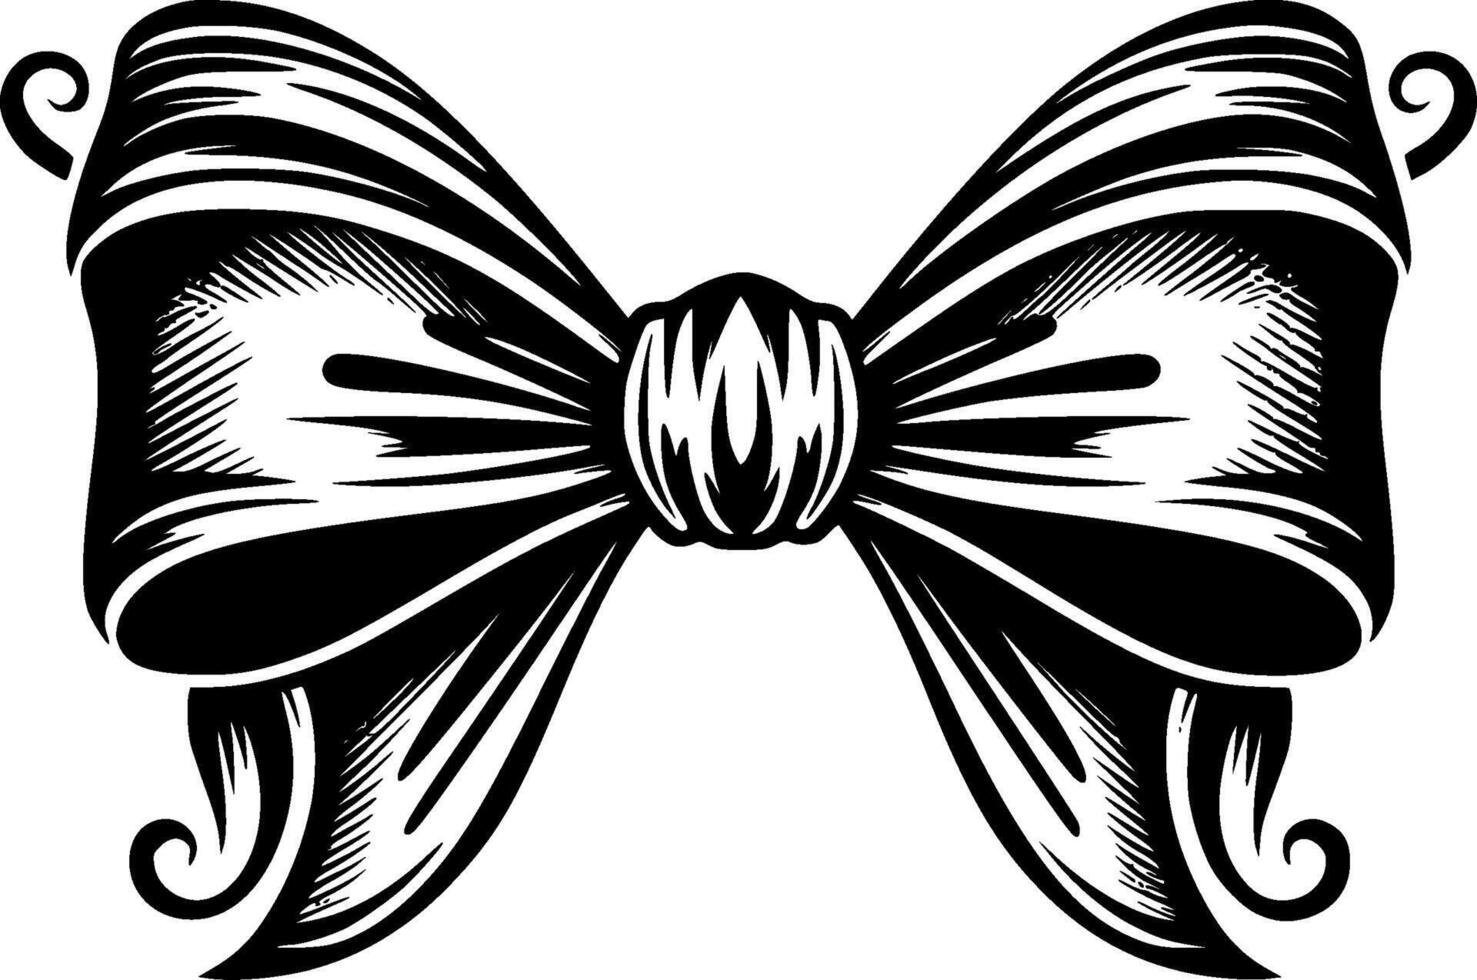 Bow - Black and White Isolated Icon - Vector illustration